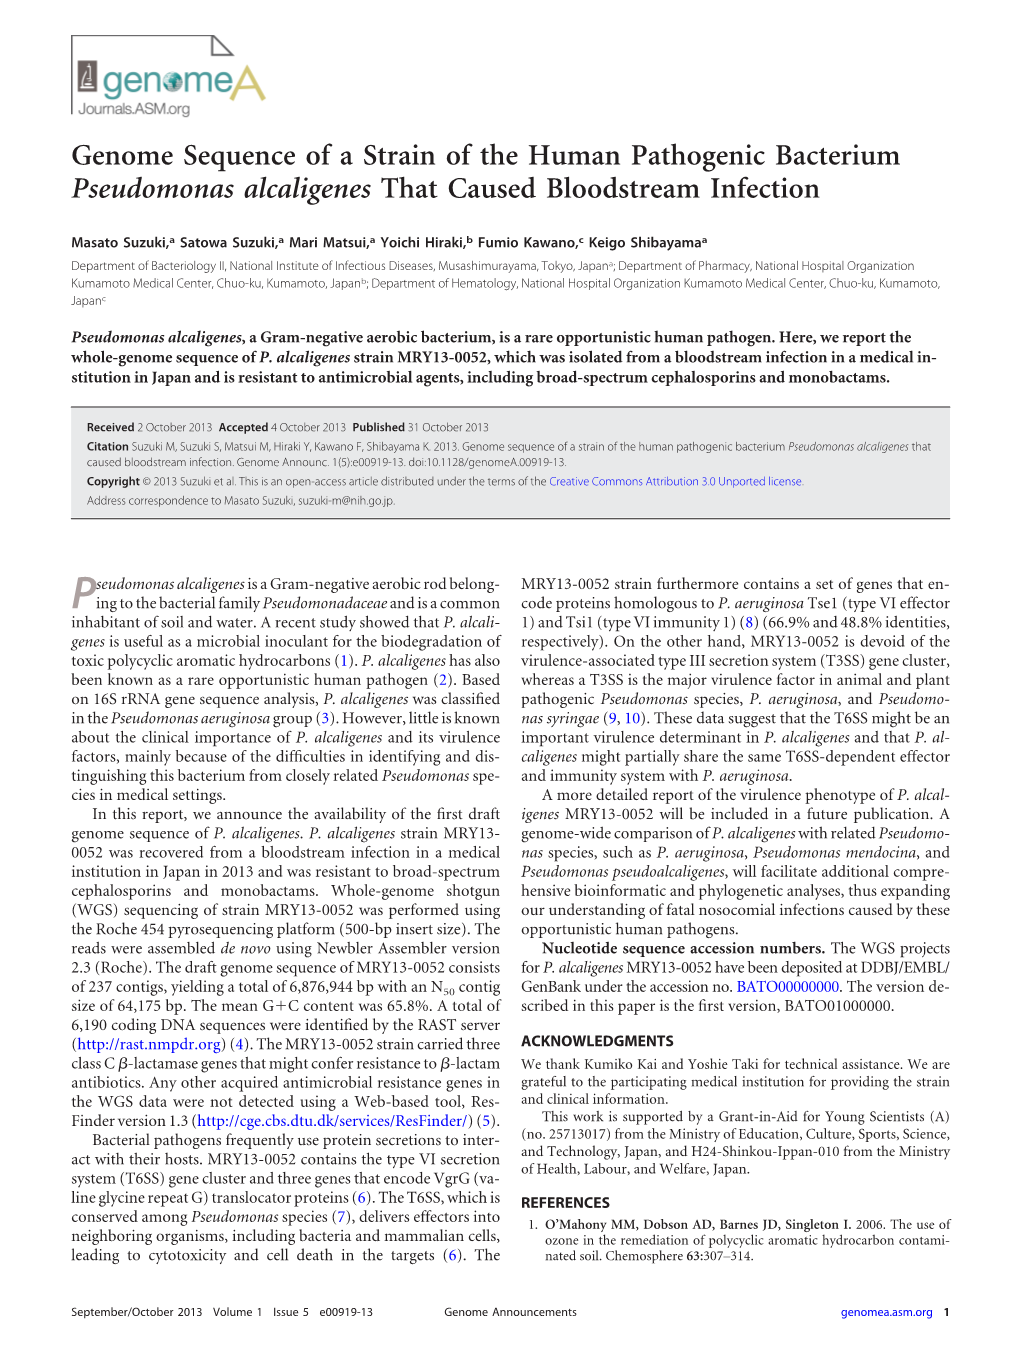 Genome Sequence of a Strain of the Human Pathogenic Bacterium Pseudomonas Alcaligenes That Caused Bloodstream Infection